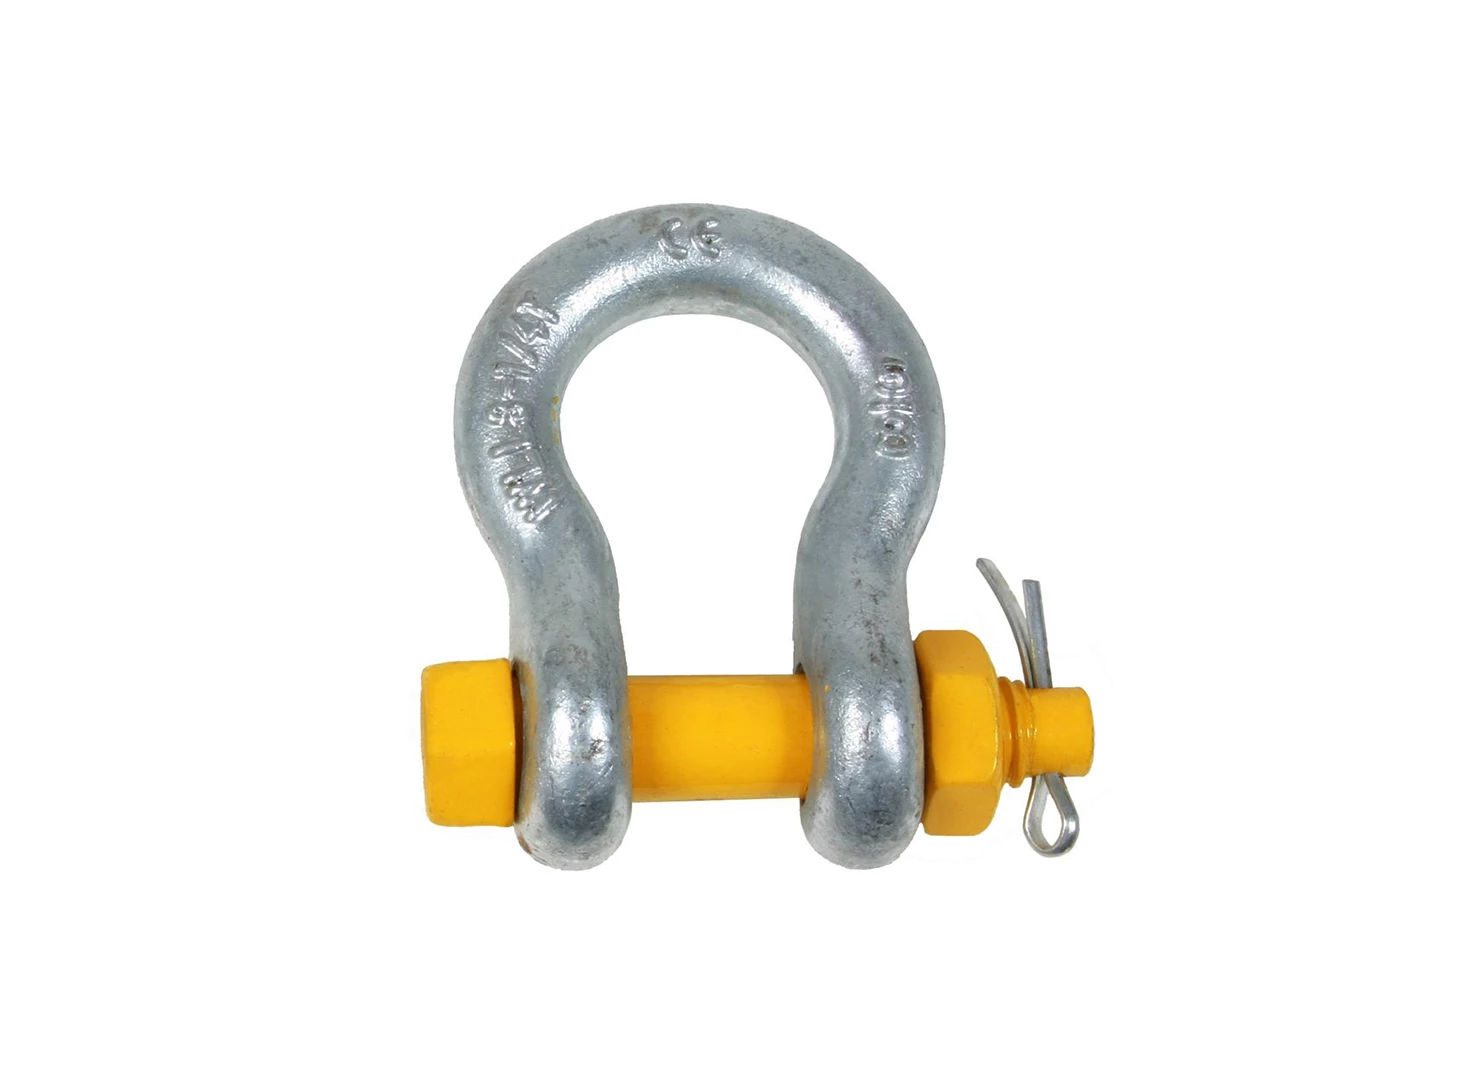 Product: Shackles 19mm, 3.25 t